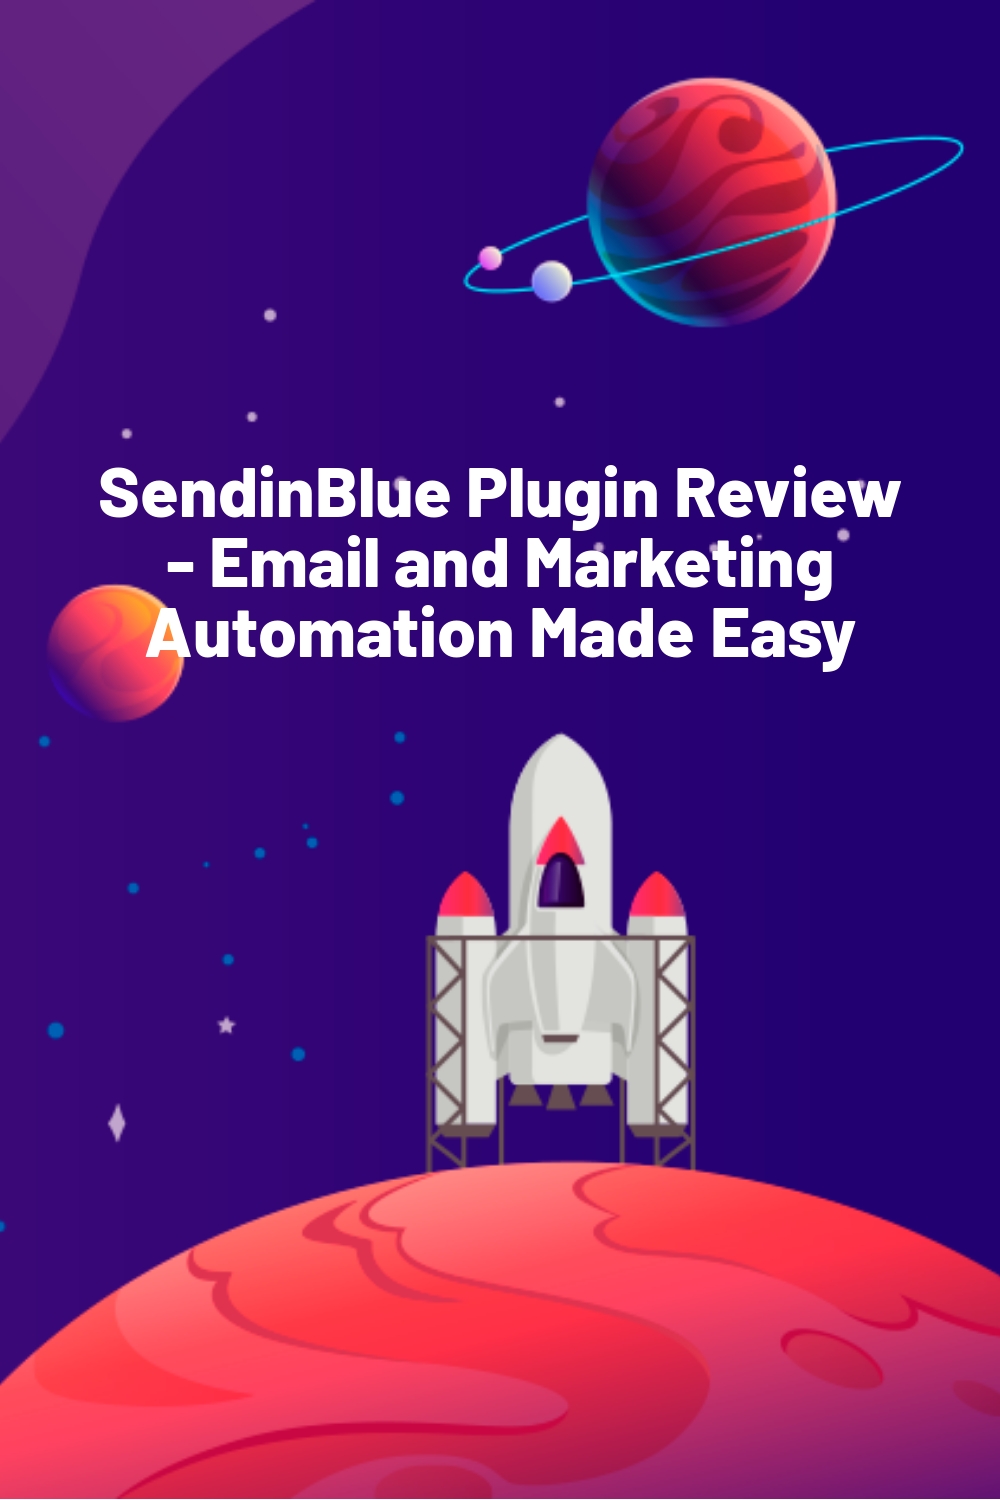 SendinBlue Plugin Review – Email and Marketing Automation Made Easy